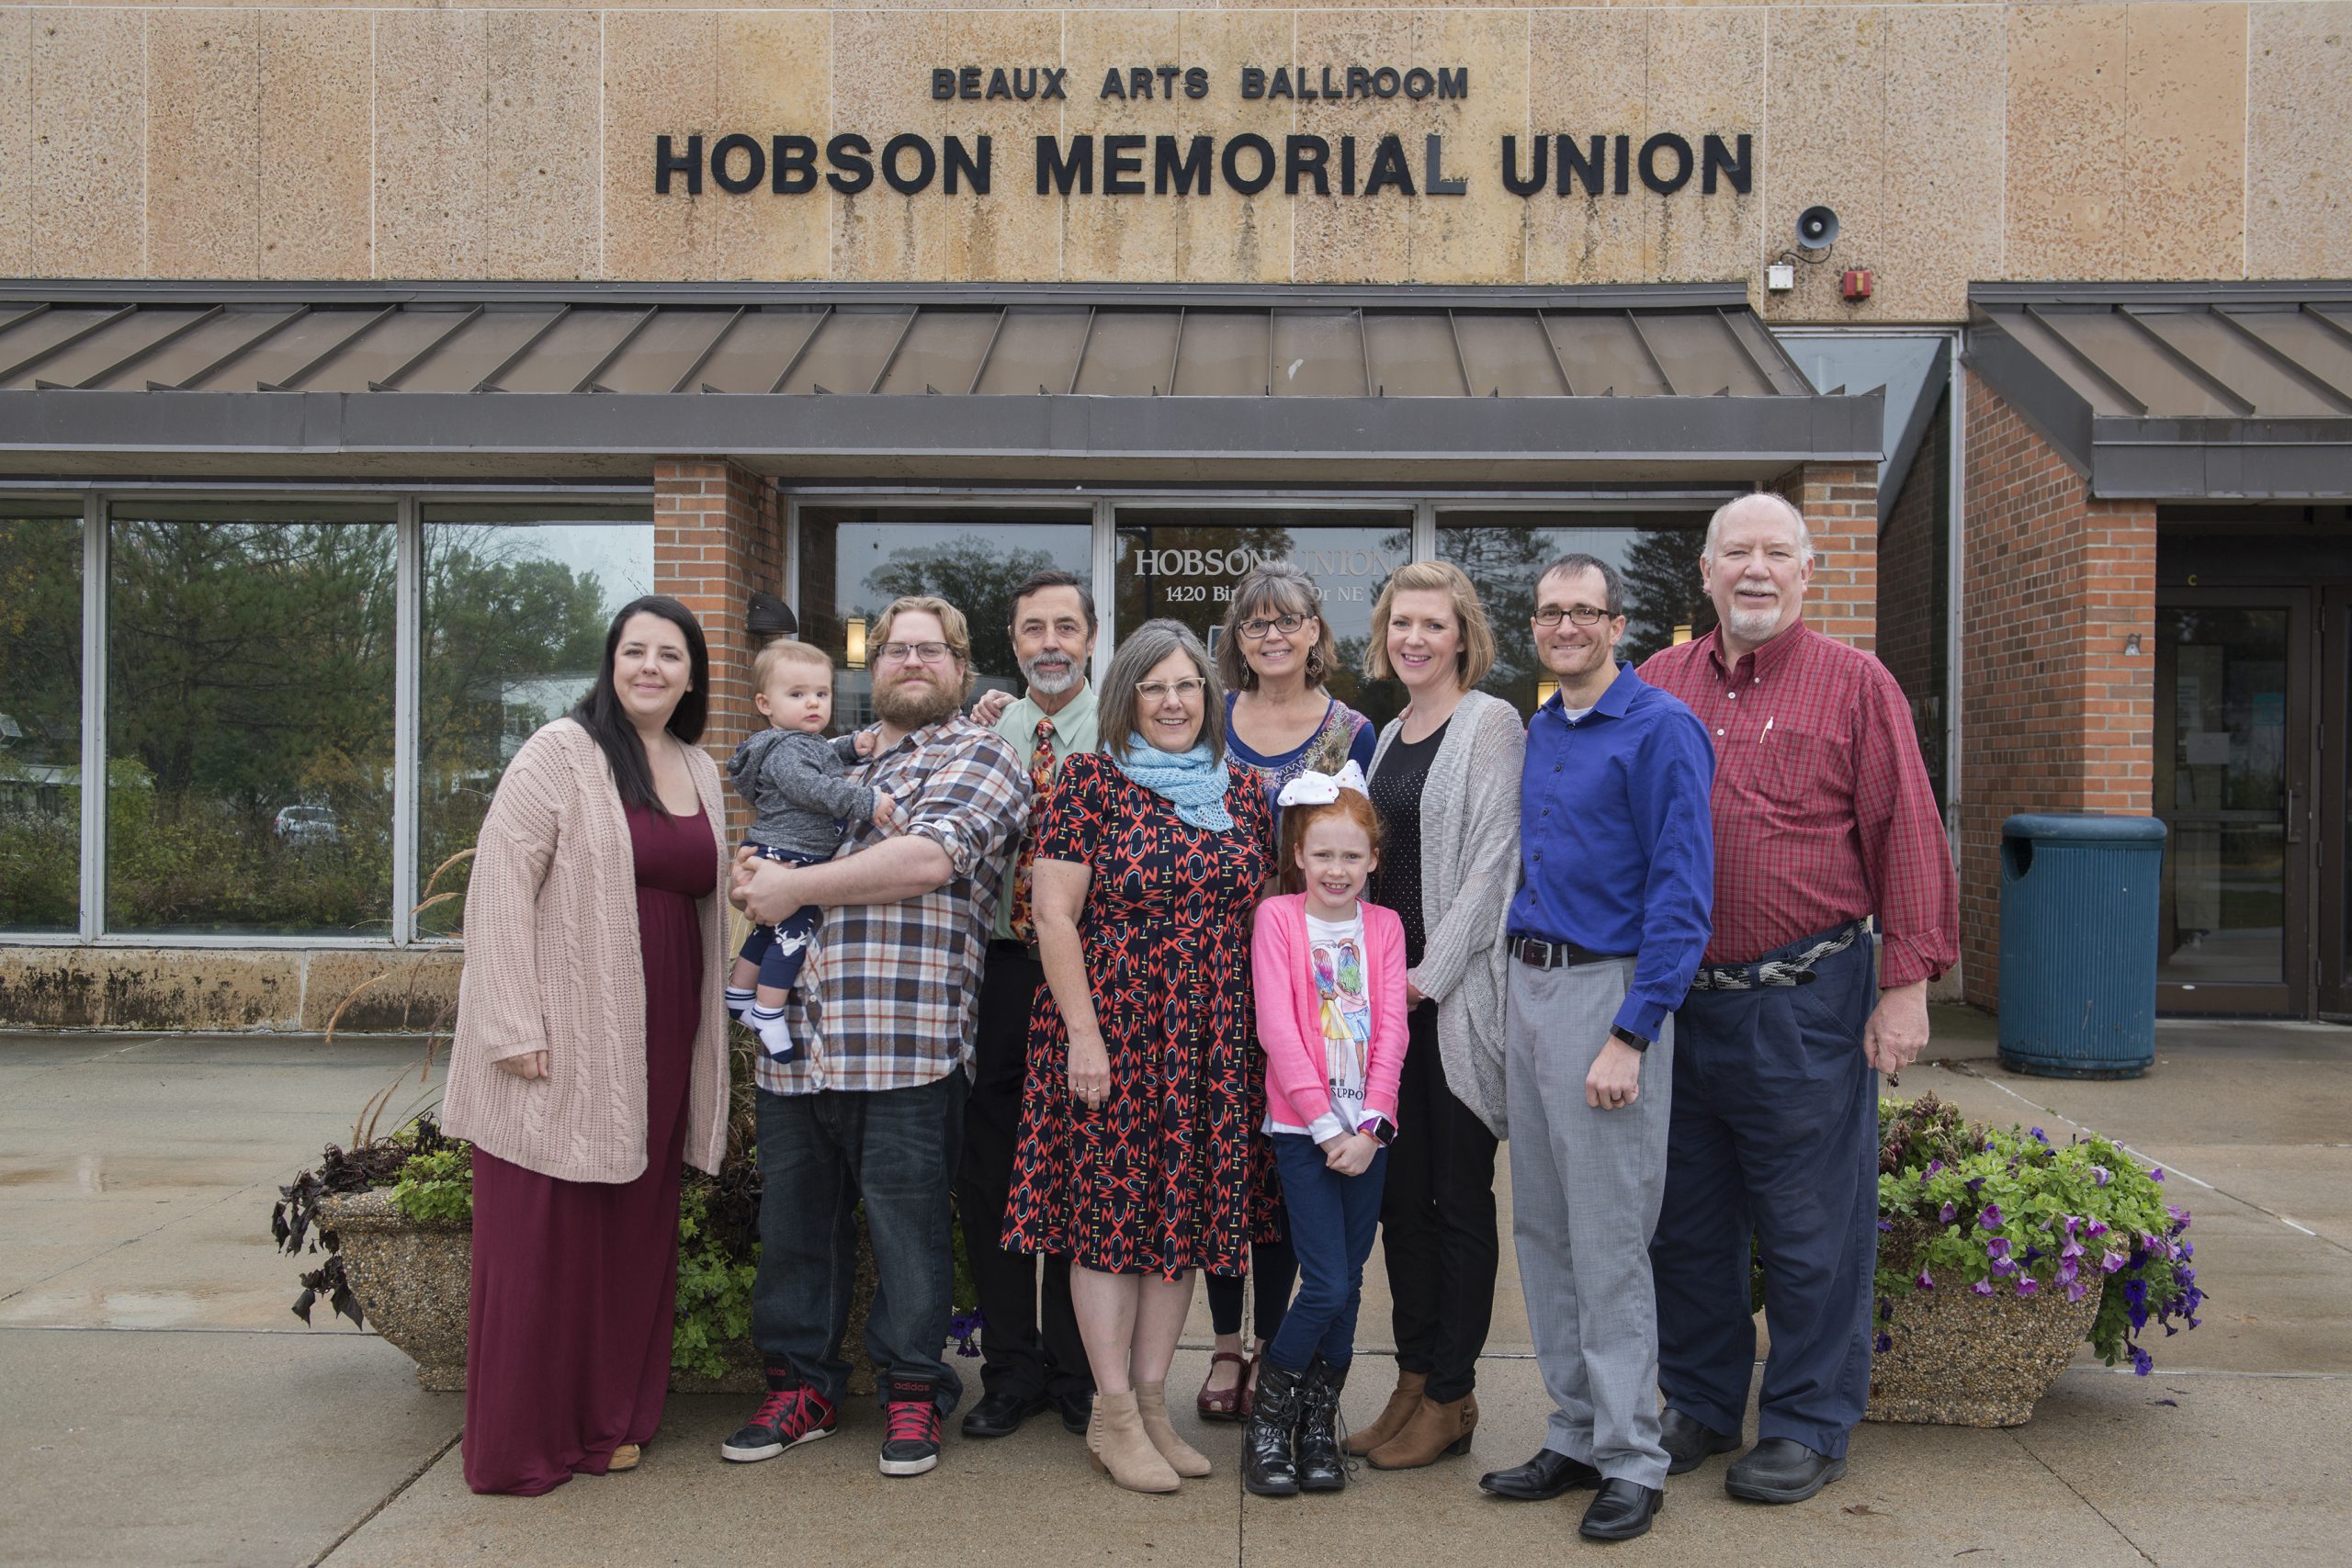 The family of Hobson Memorial Union namesake C.V. Hobson was on hand to help commemorate the union’s 50th anniversary.